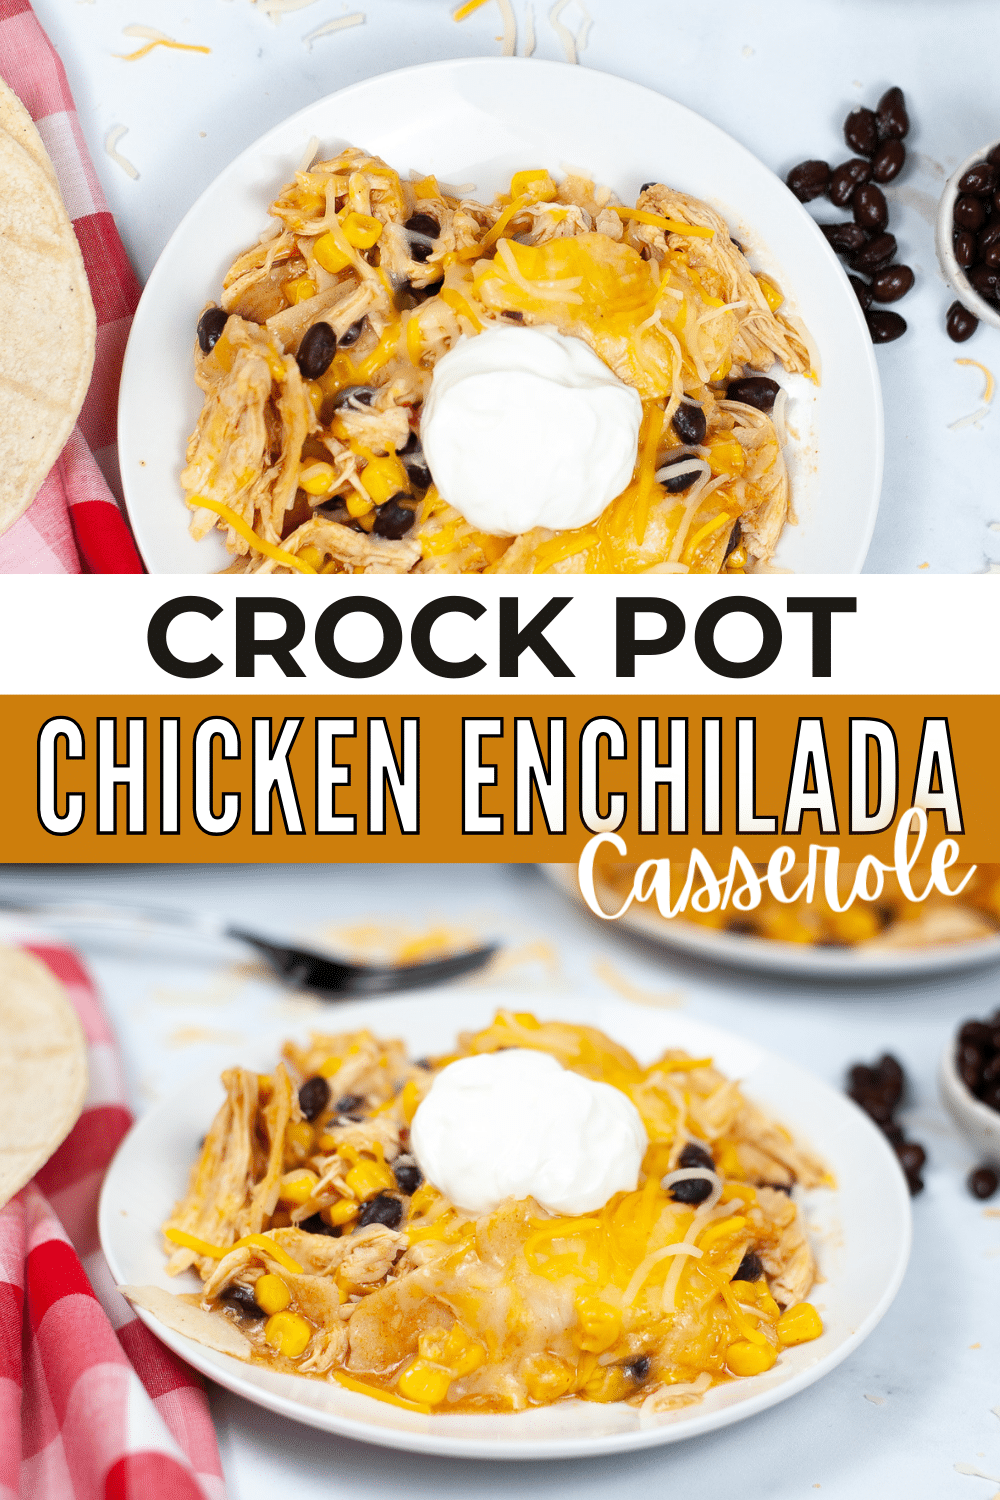 Chicken enchilada casserole cooked in a crock pot.